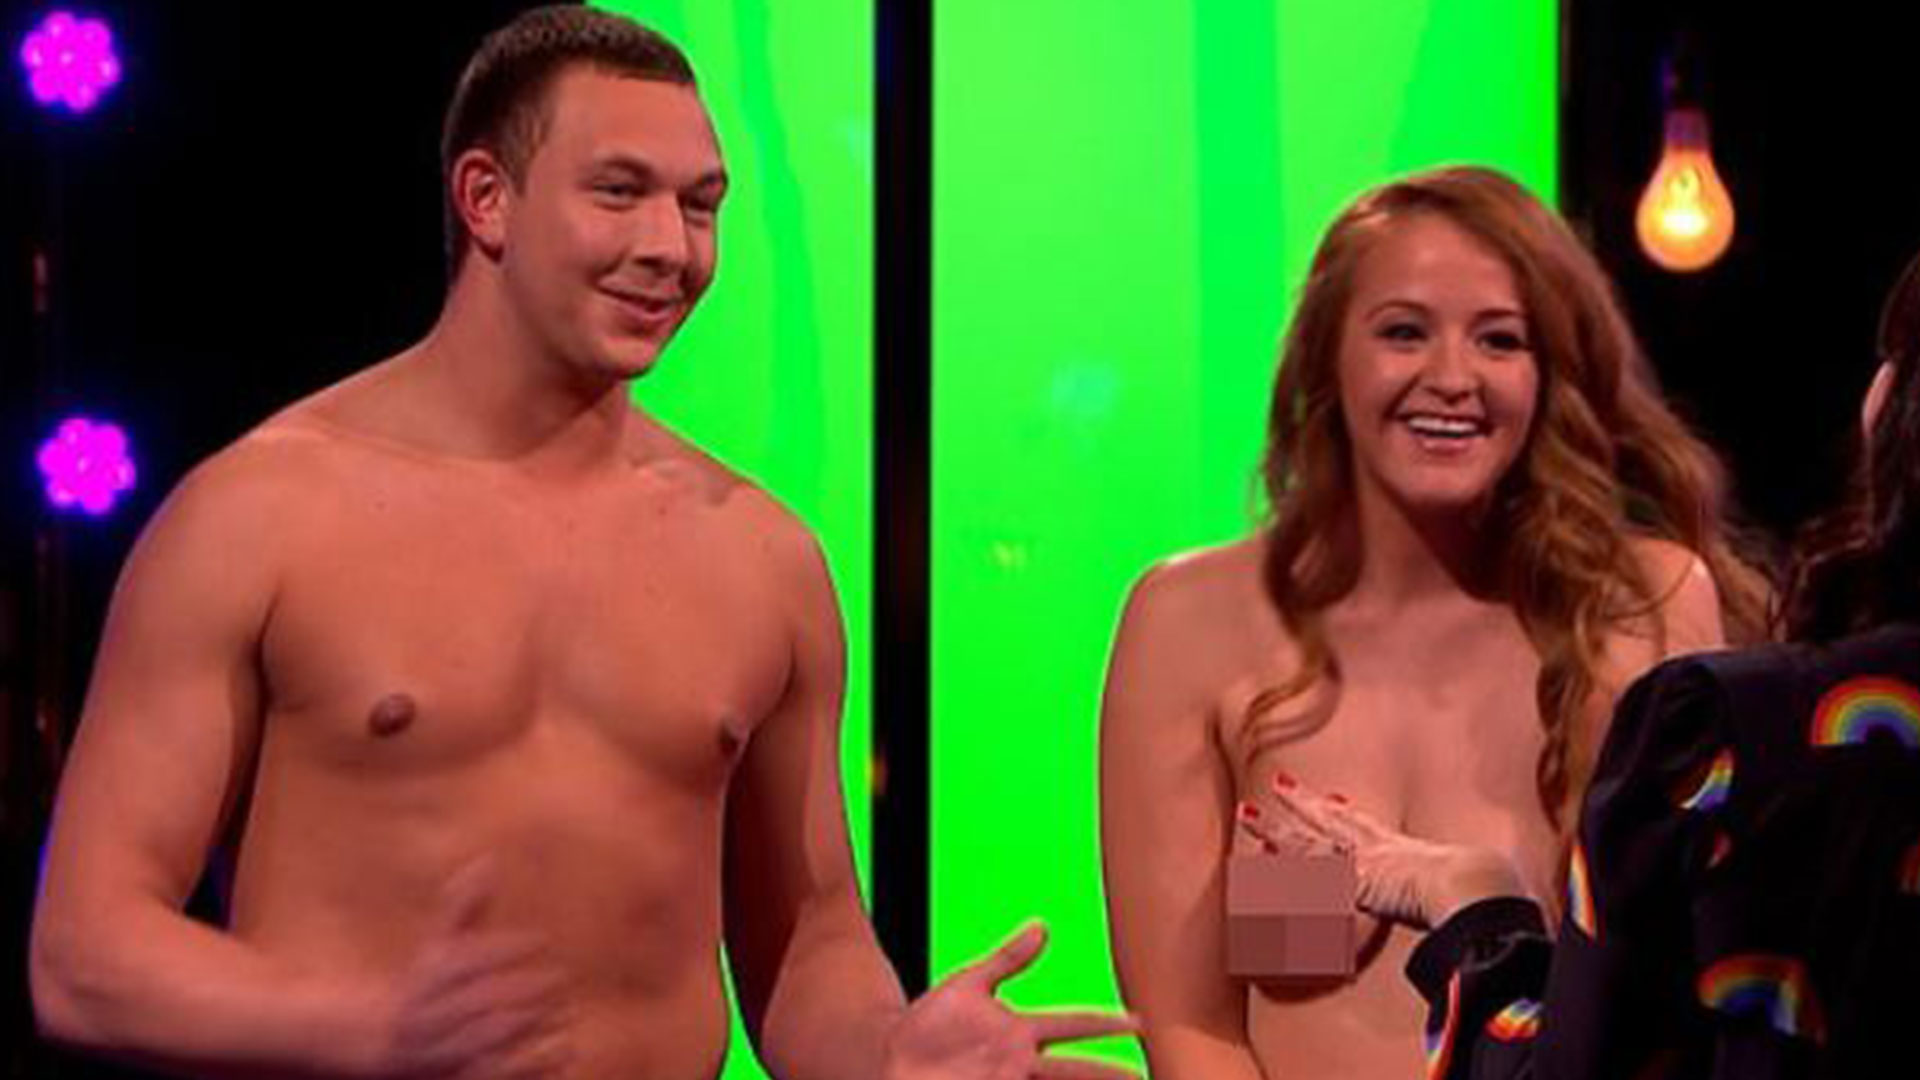 cheryl poitevint recommends Naked Attraction Season 4 Episode 1